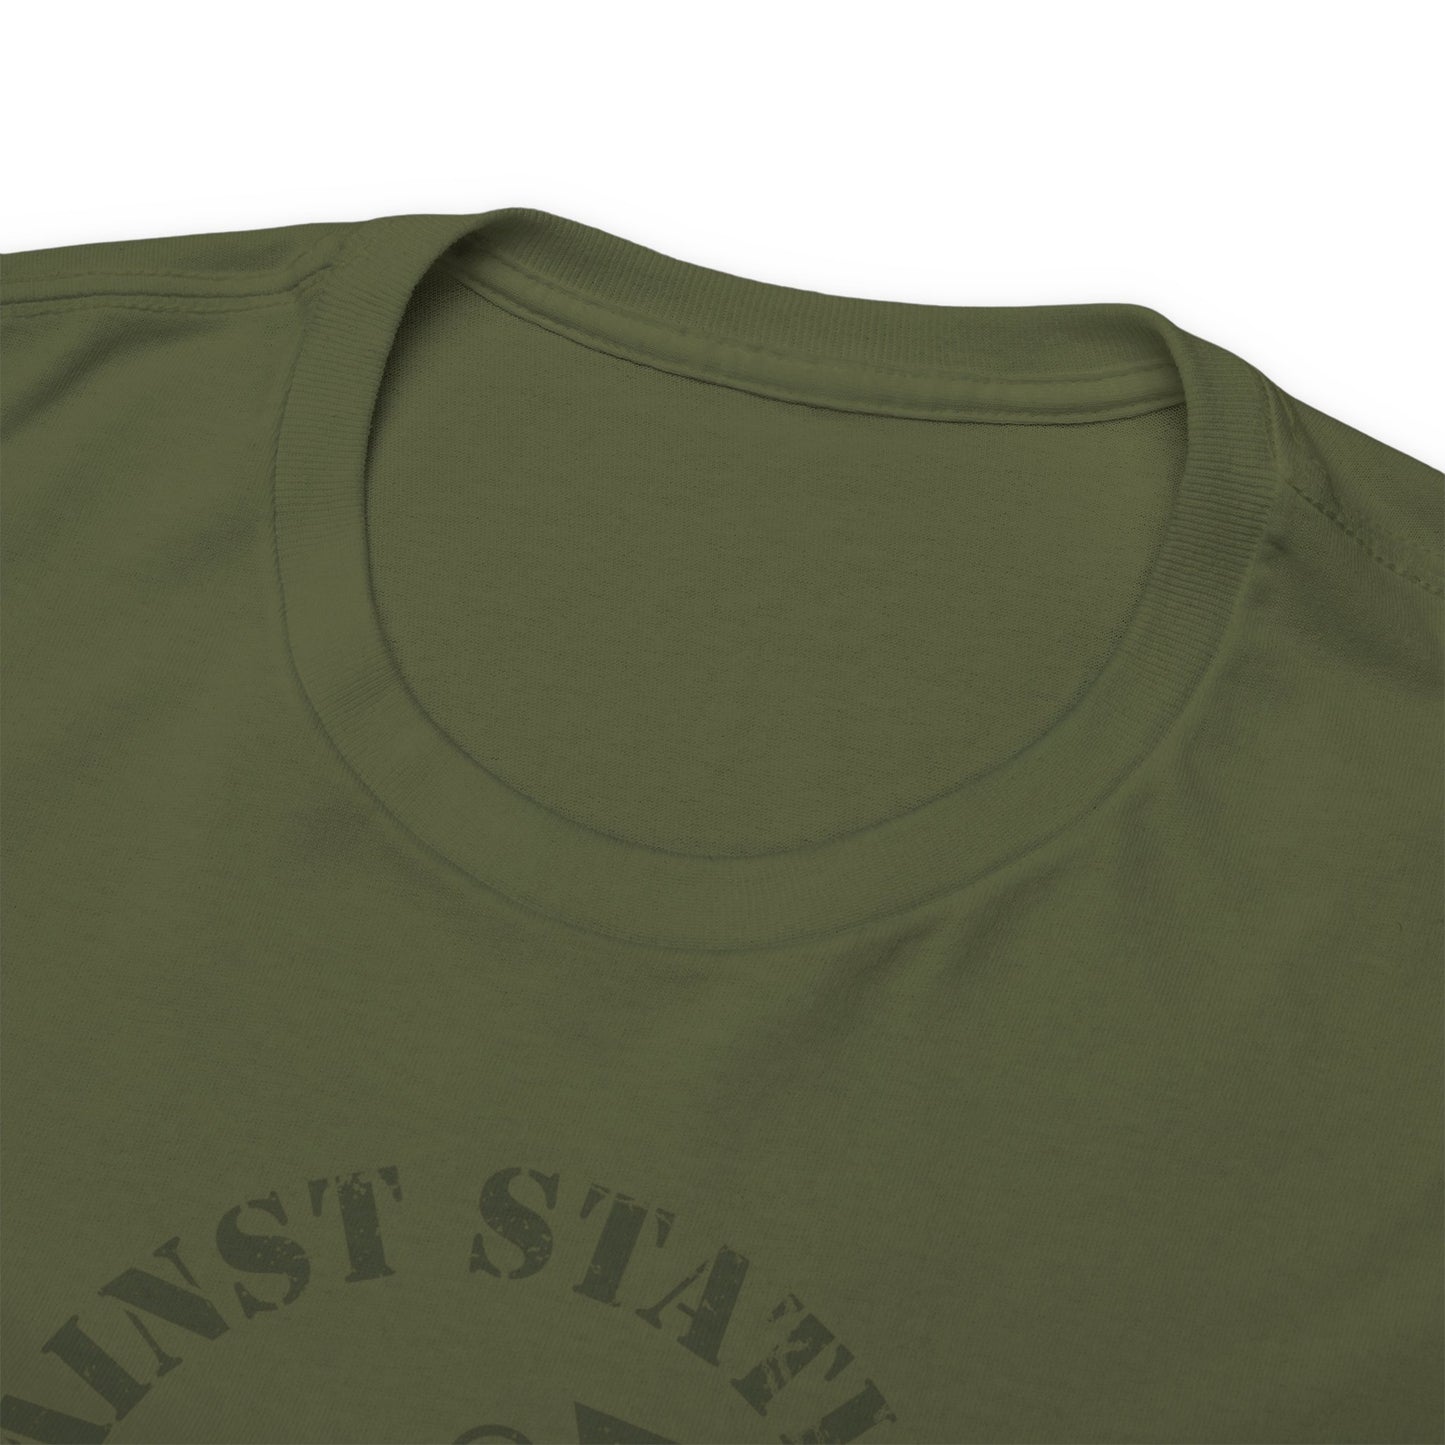 Unisex Heavy Cotton Tee - Made in Germany - Simple Color Military Green